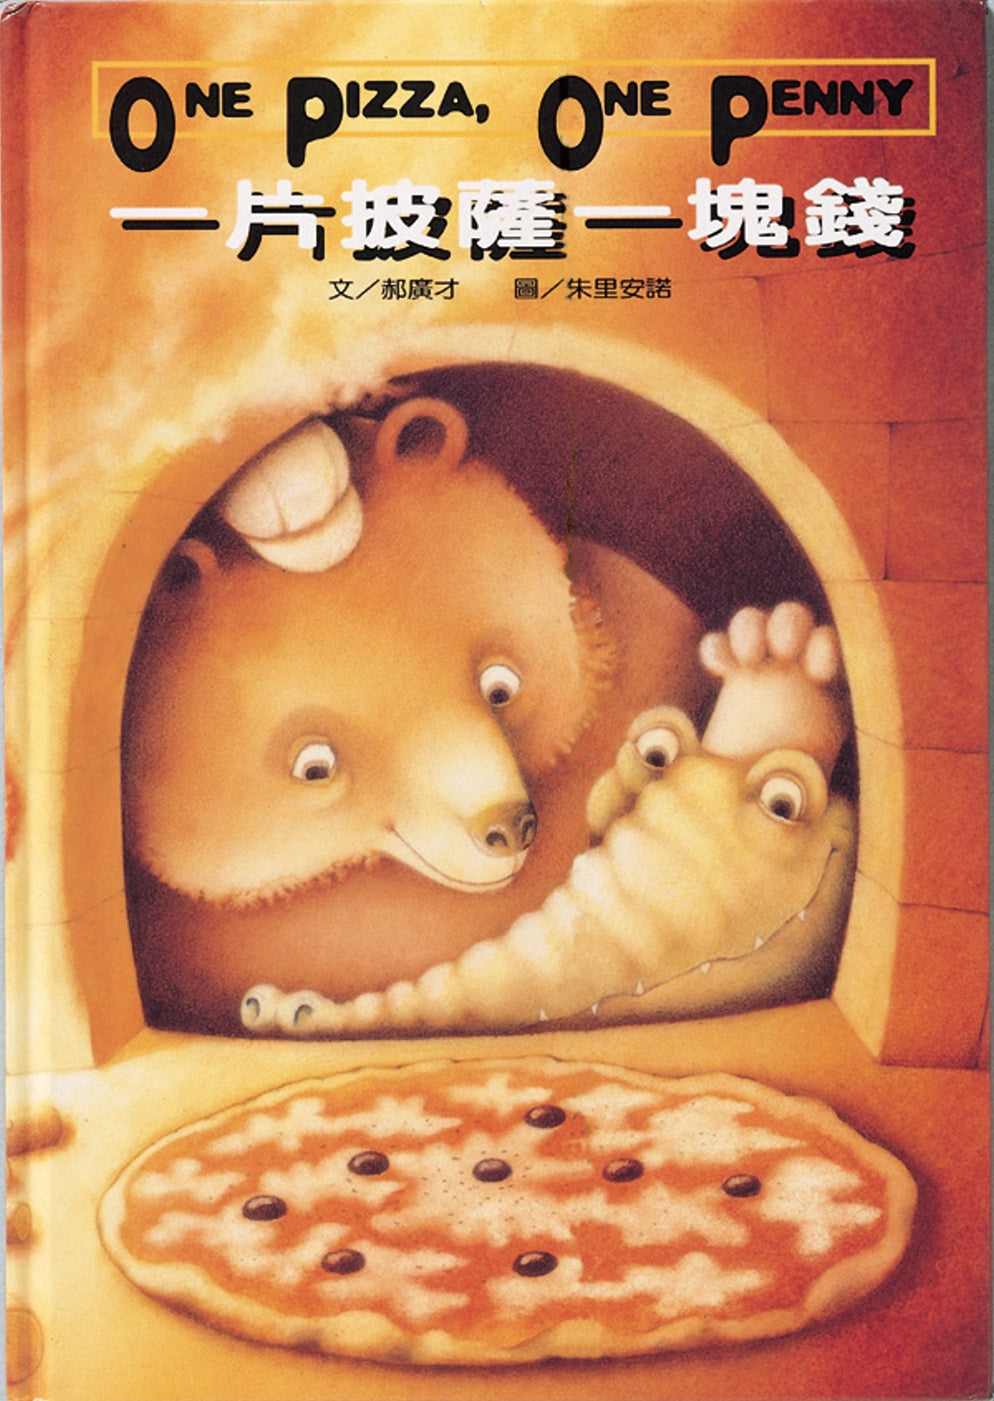 One Pizza, One Penny • 一片披薩一塊錢